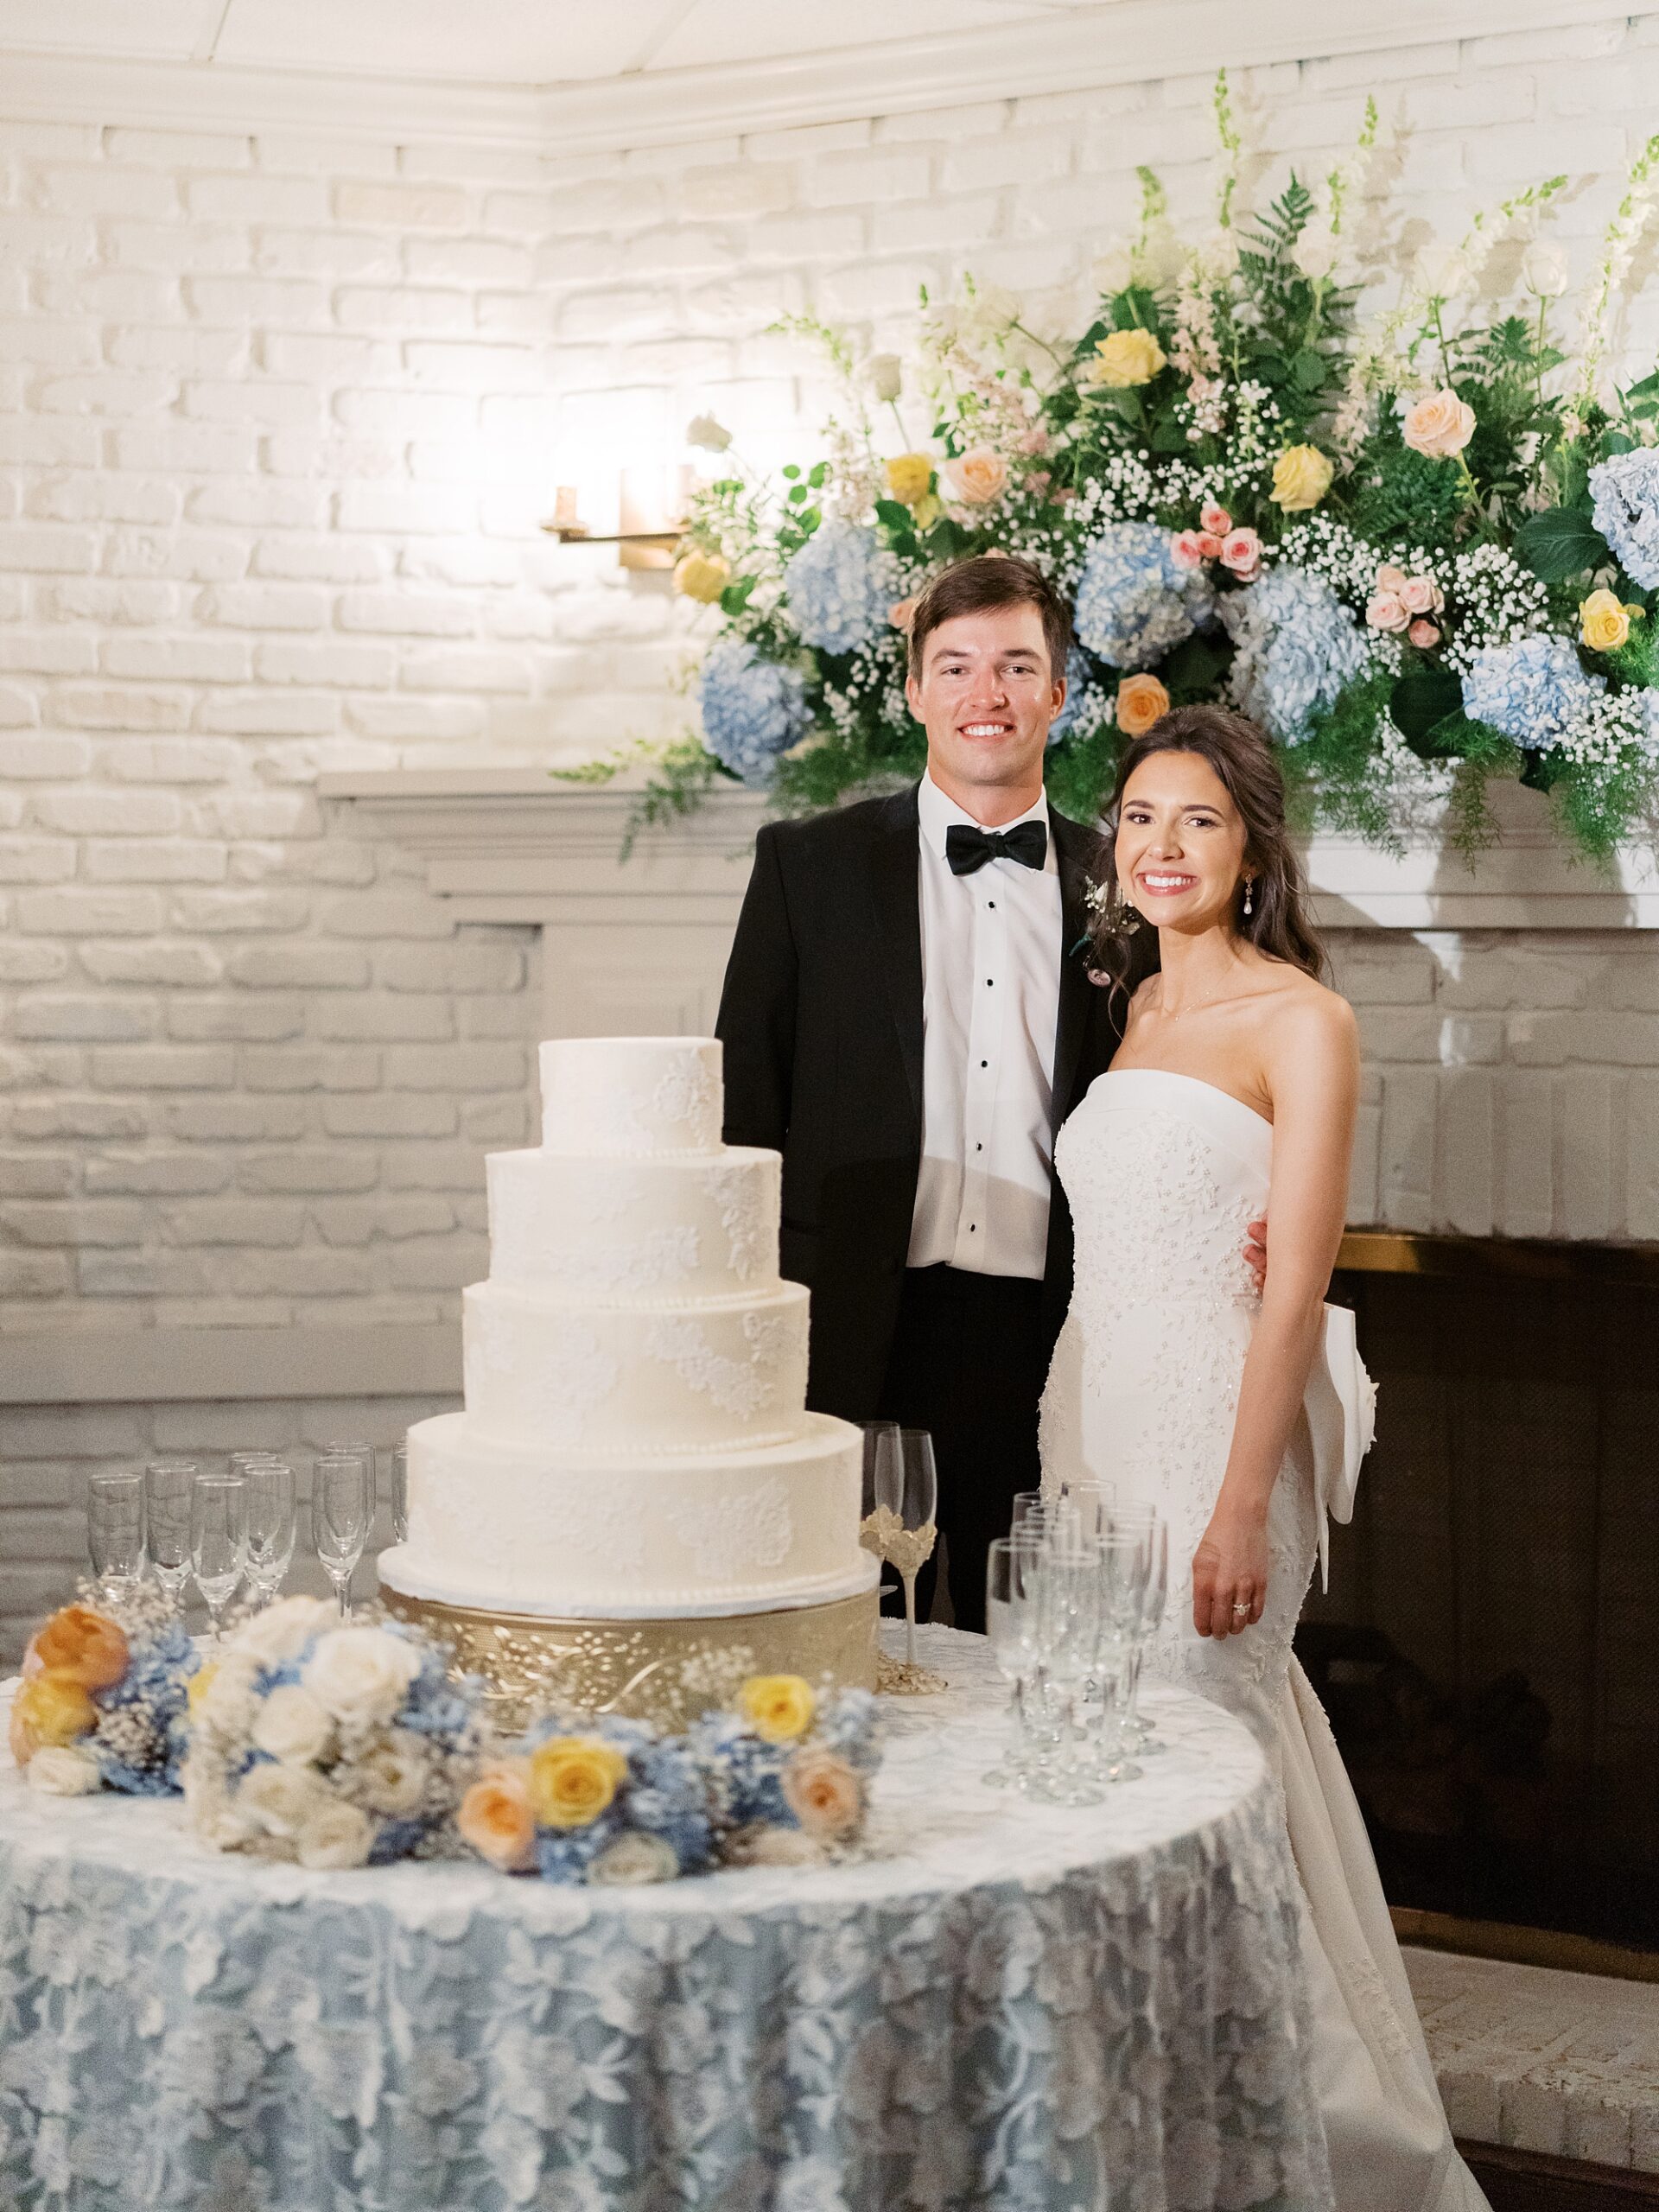 newlyweds stand by cake in front of fireplace with blue floral arrangement 